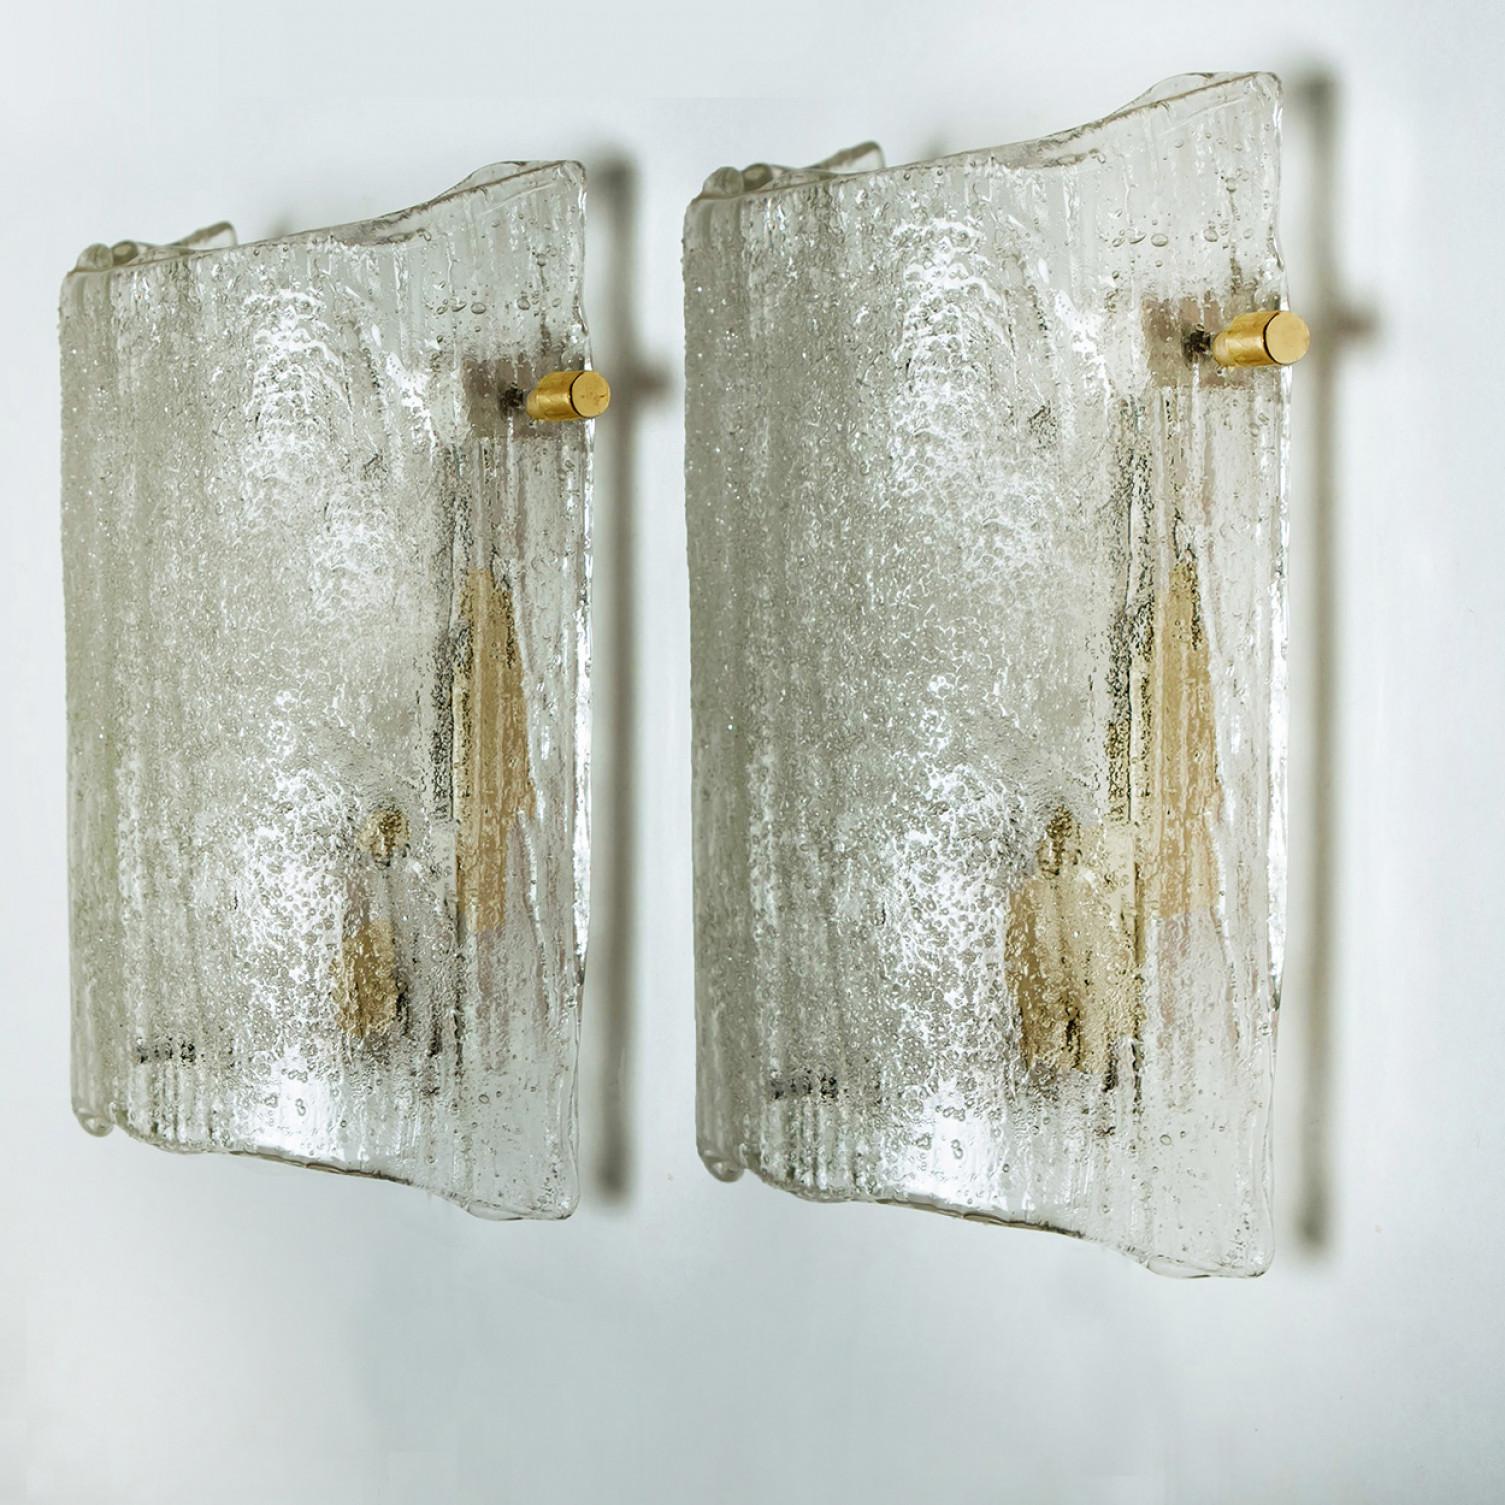 Clean lines to complement all decors. A wonderful high-end J.T. Kalmar wall light fixture with thick textured blown glass giving the piece a heavy ice appearance which refracts the light, filling a room with a soft, warm glow.

The wall sconce has a